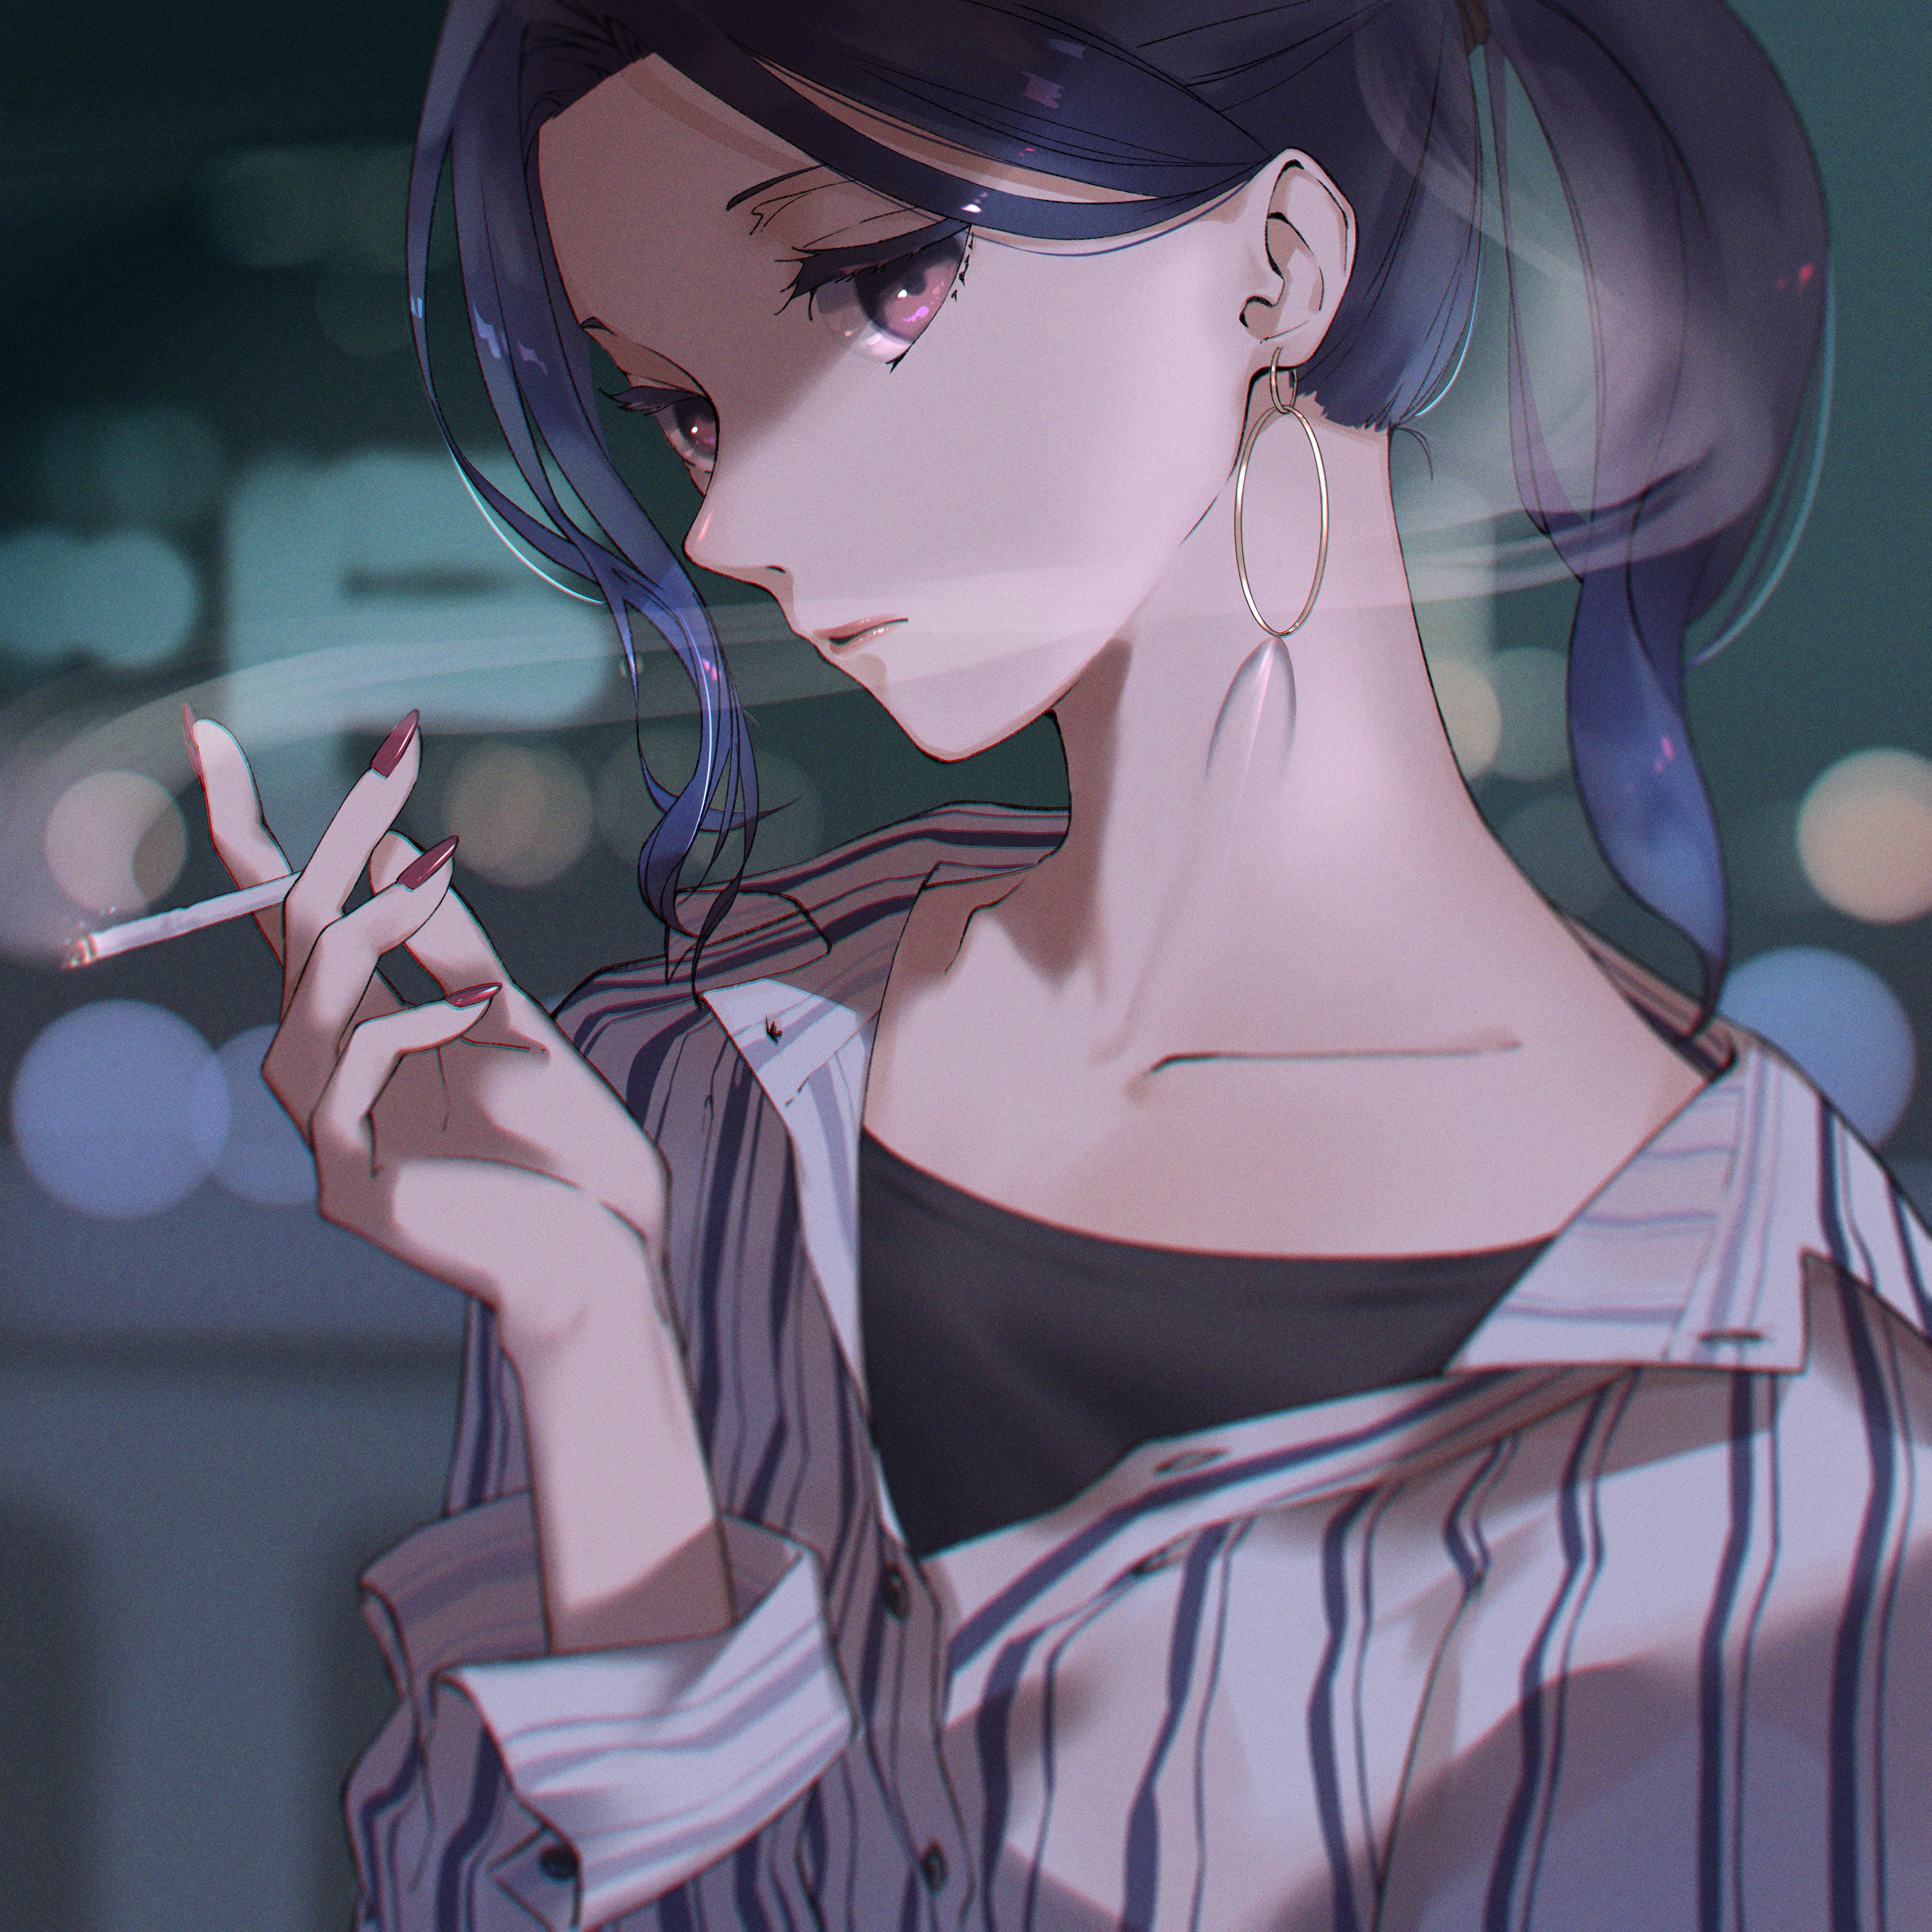 1440x2960 Black Lagoon Anime Girl Smoking 4k Samsung Galaxy Note 98  S9S8S8 QHD HD 4k Wallpapers Images Backgrounds Photos and Pictures